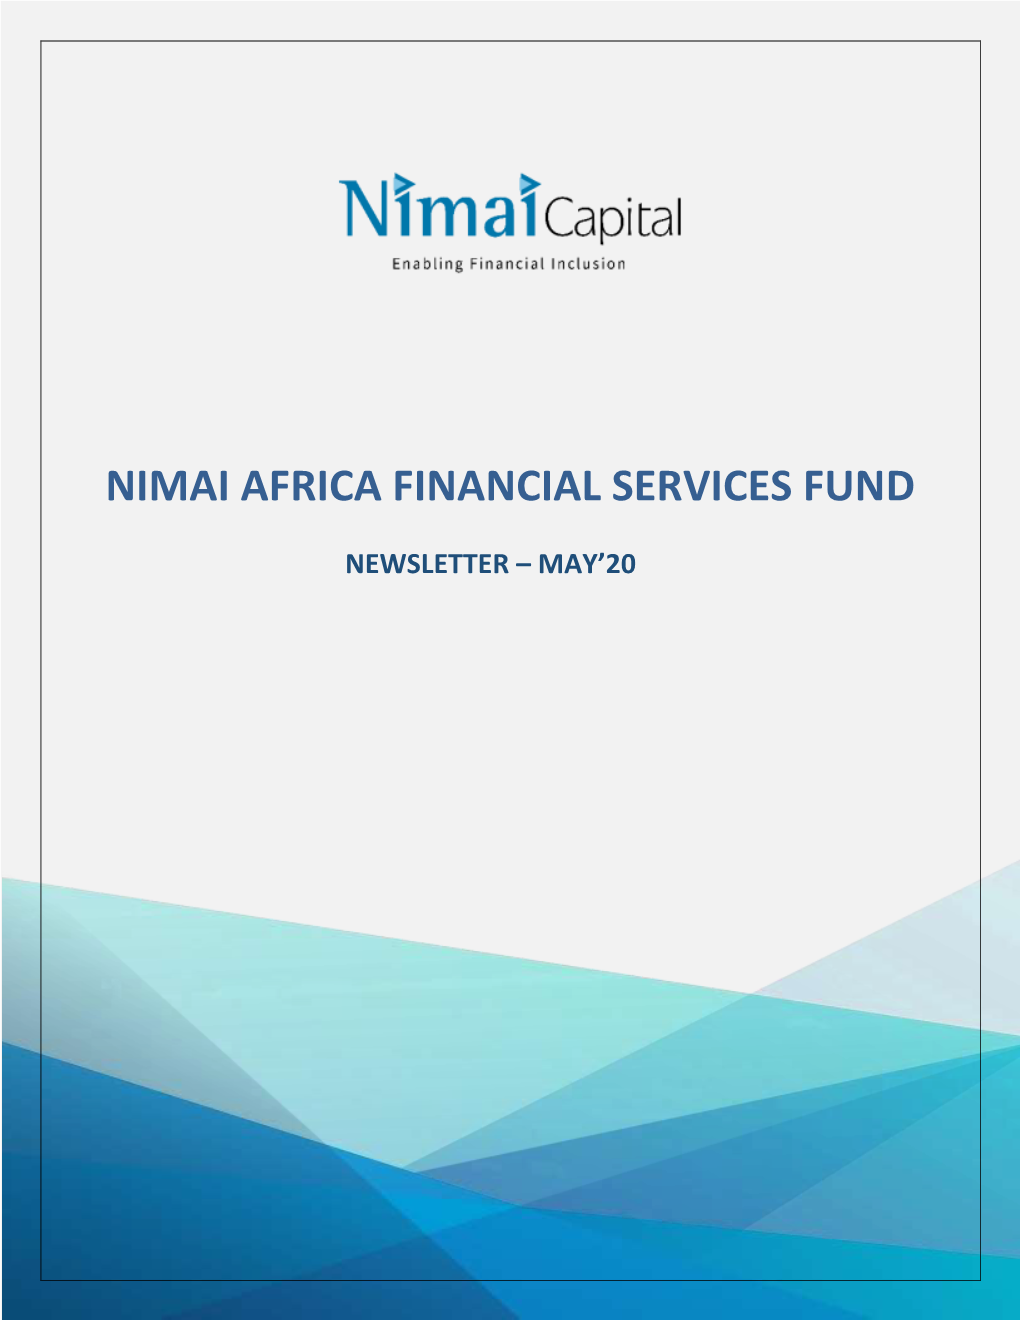 Nimai Africa Financial Services Fund